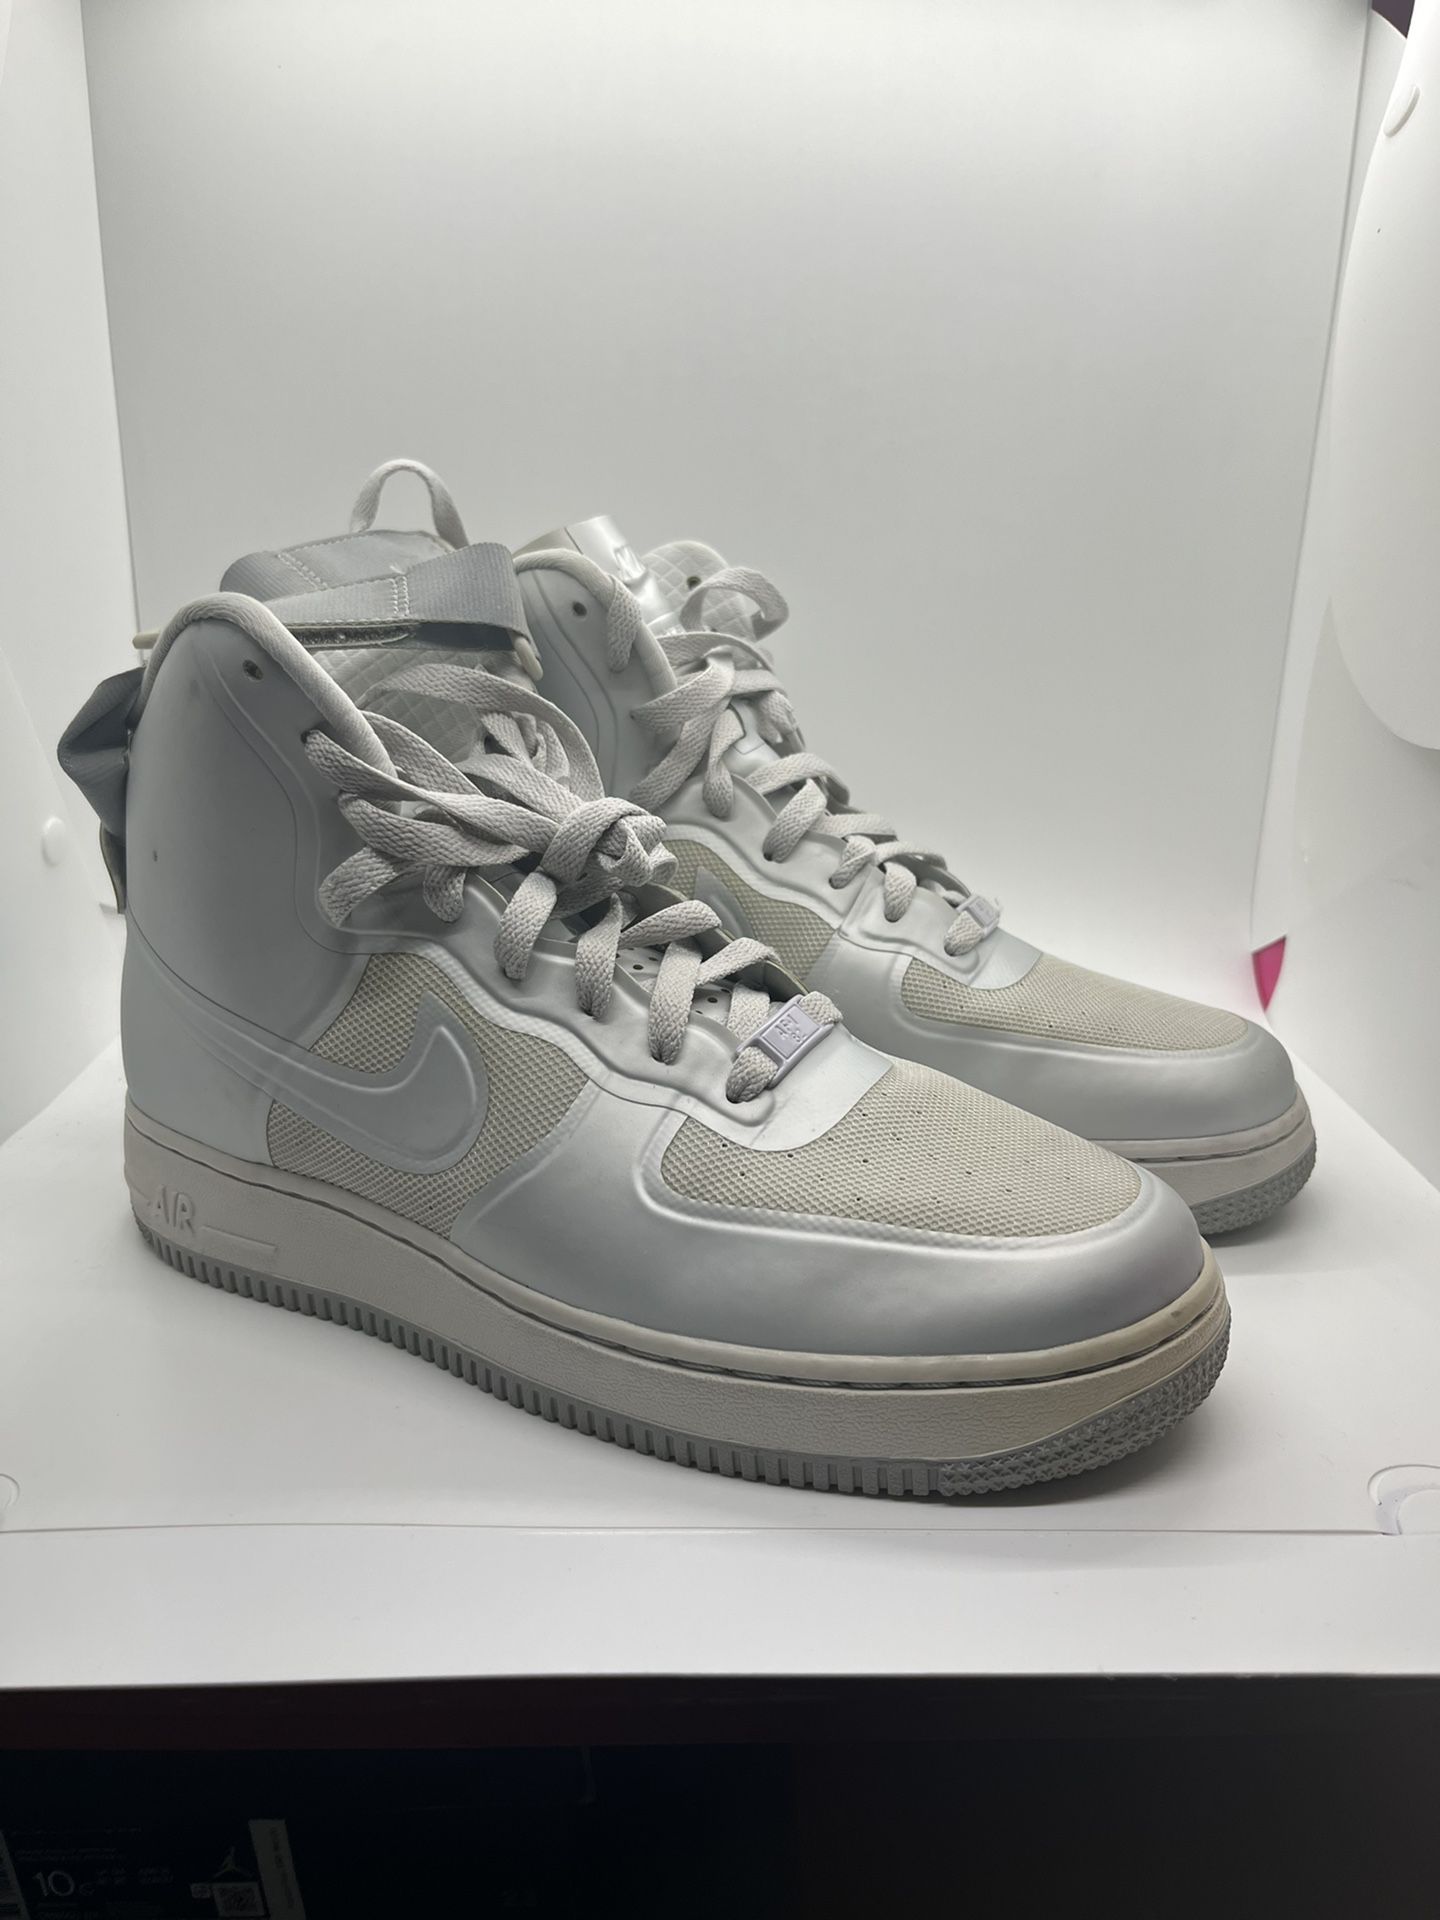 Rare Mens Nike Air Force AF-1 Hyperfuse 454433-001 Silver Hi Top Sneakers SZ 7.5 for Sale in Seattle, - OfferUp